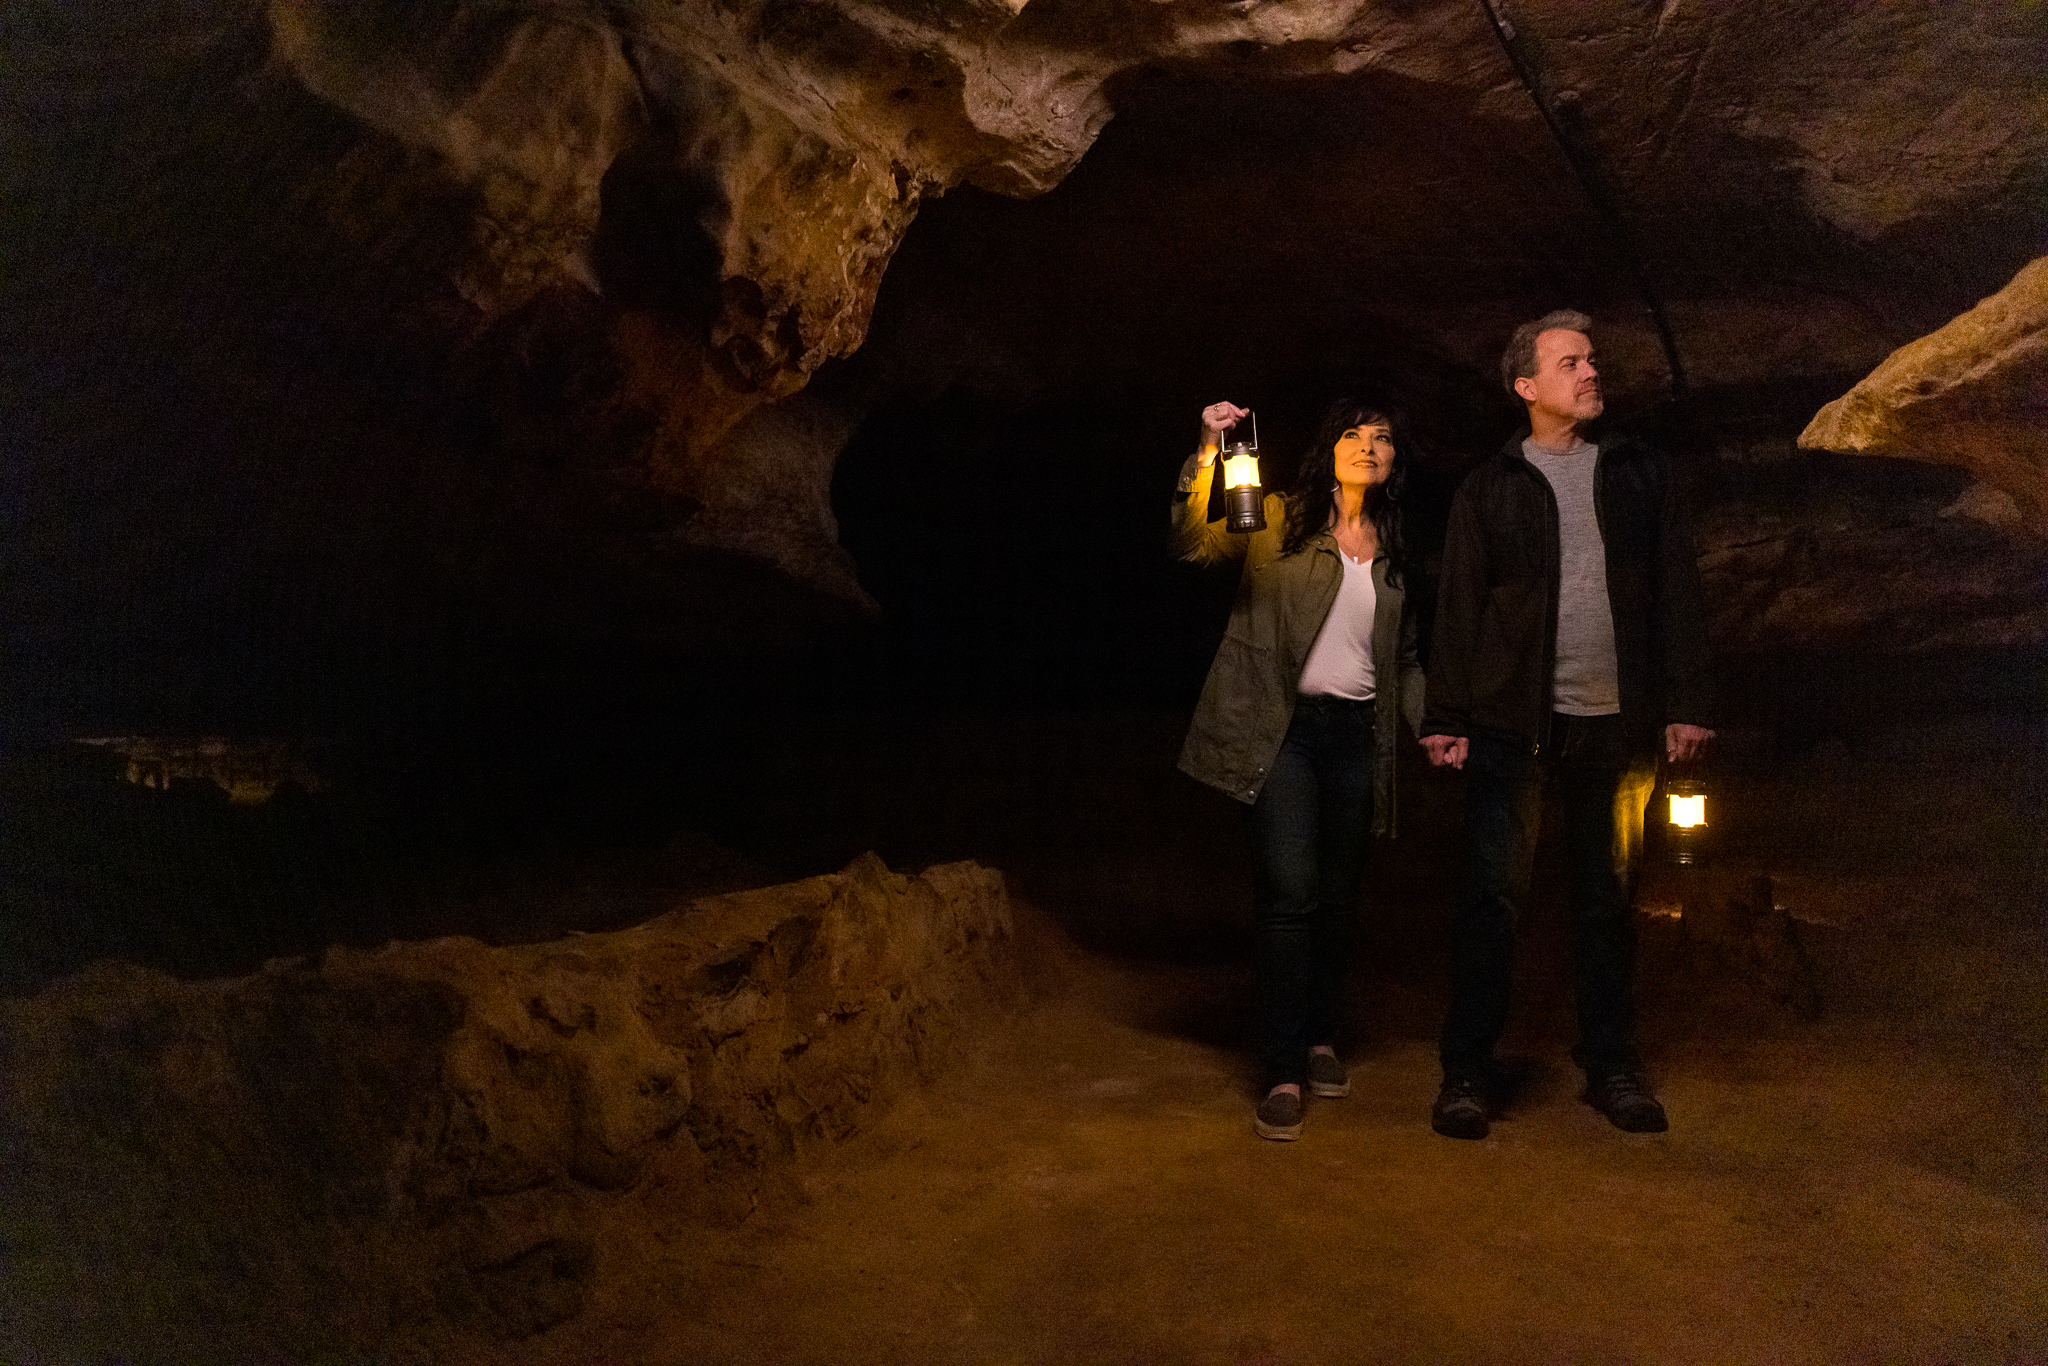 A male and female couple walk in a dimly-lit cavern holding lanterns.